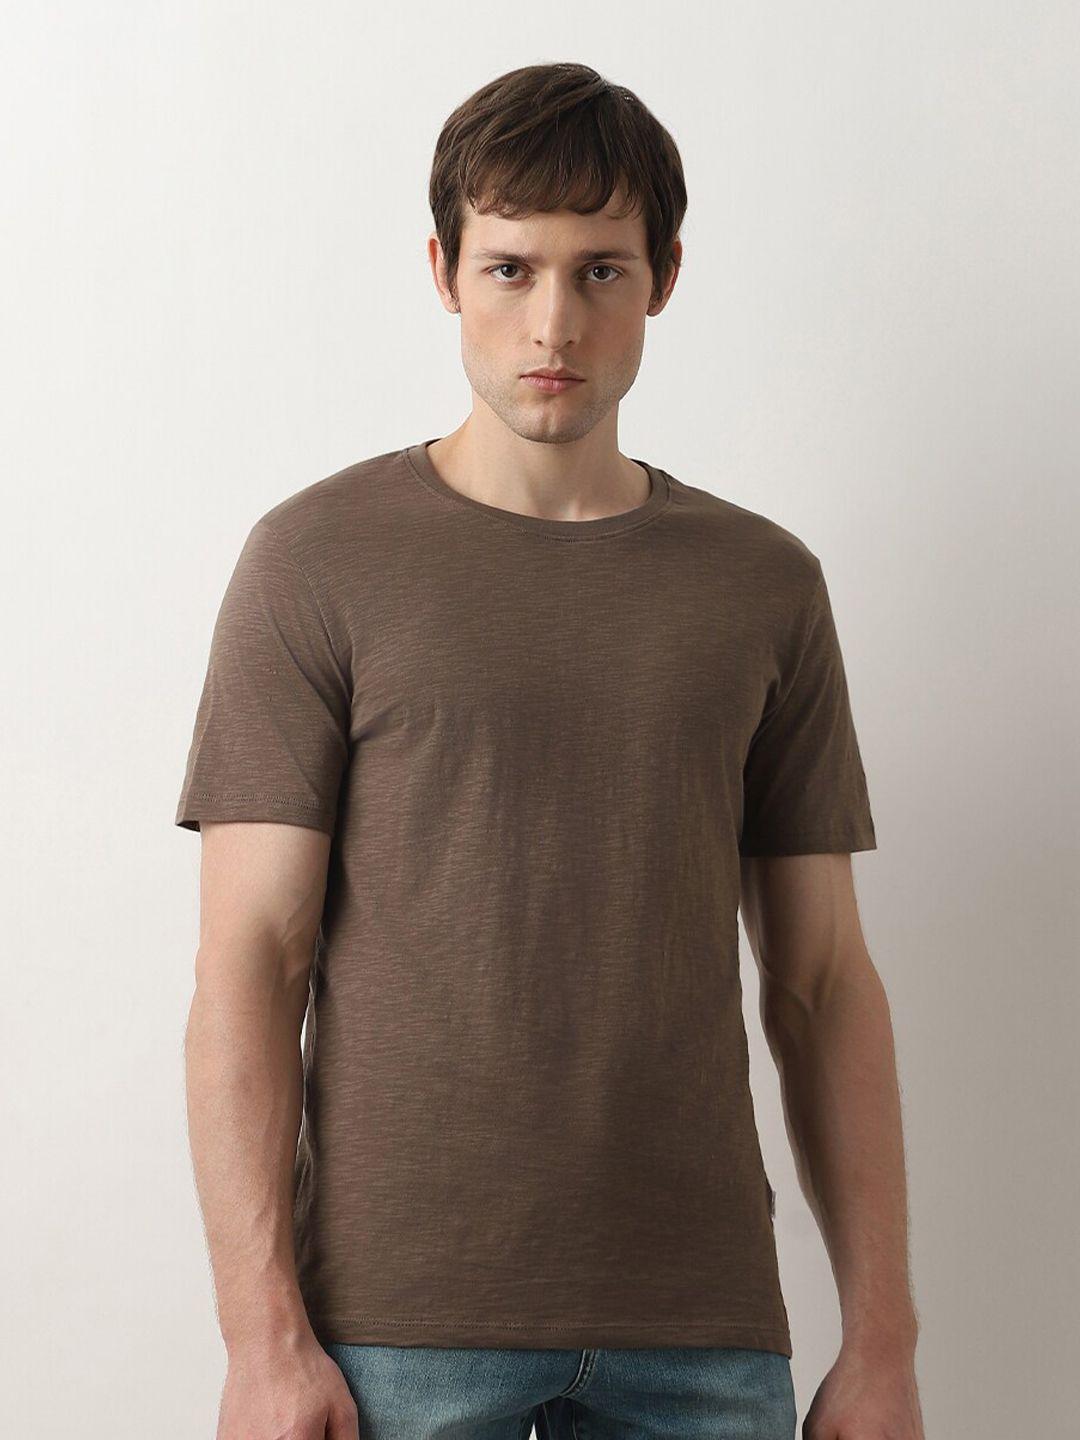 selected short sleeves organic cotton slim fit t-shirt